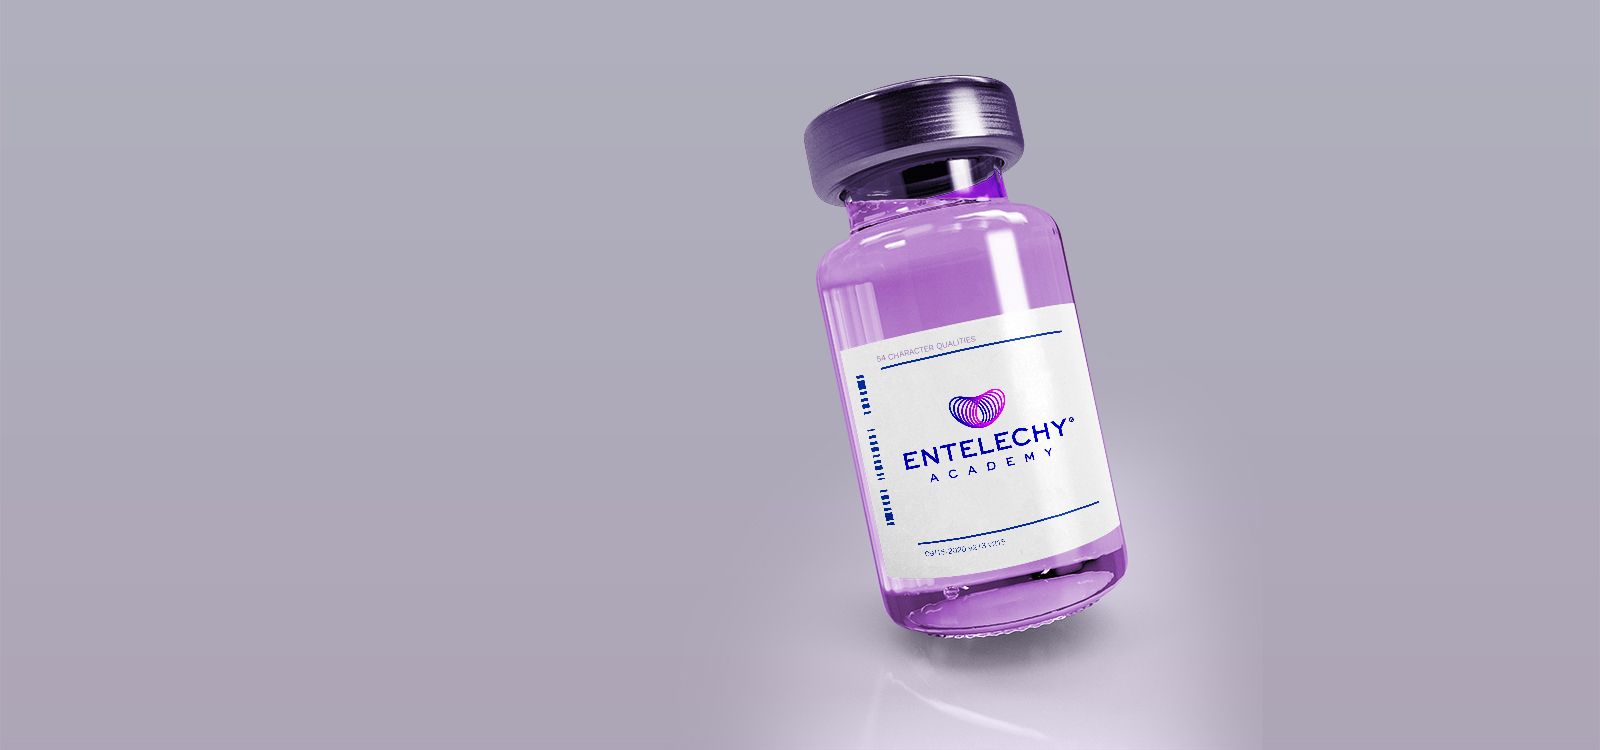 Purple pill bottle with Entelechy Academy logo on the label